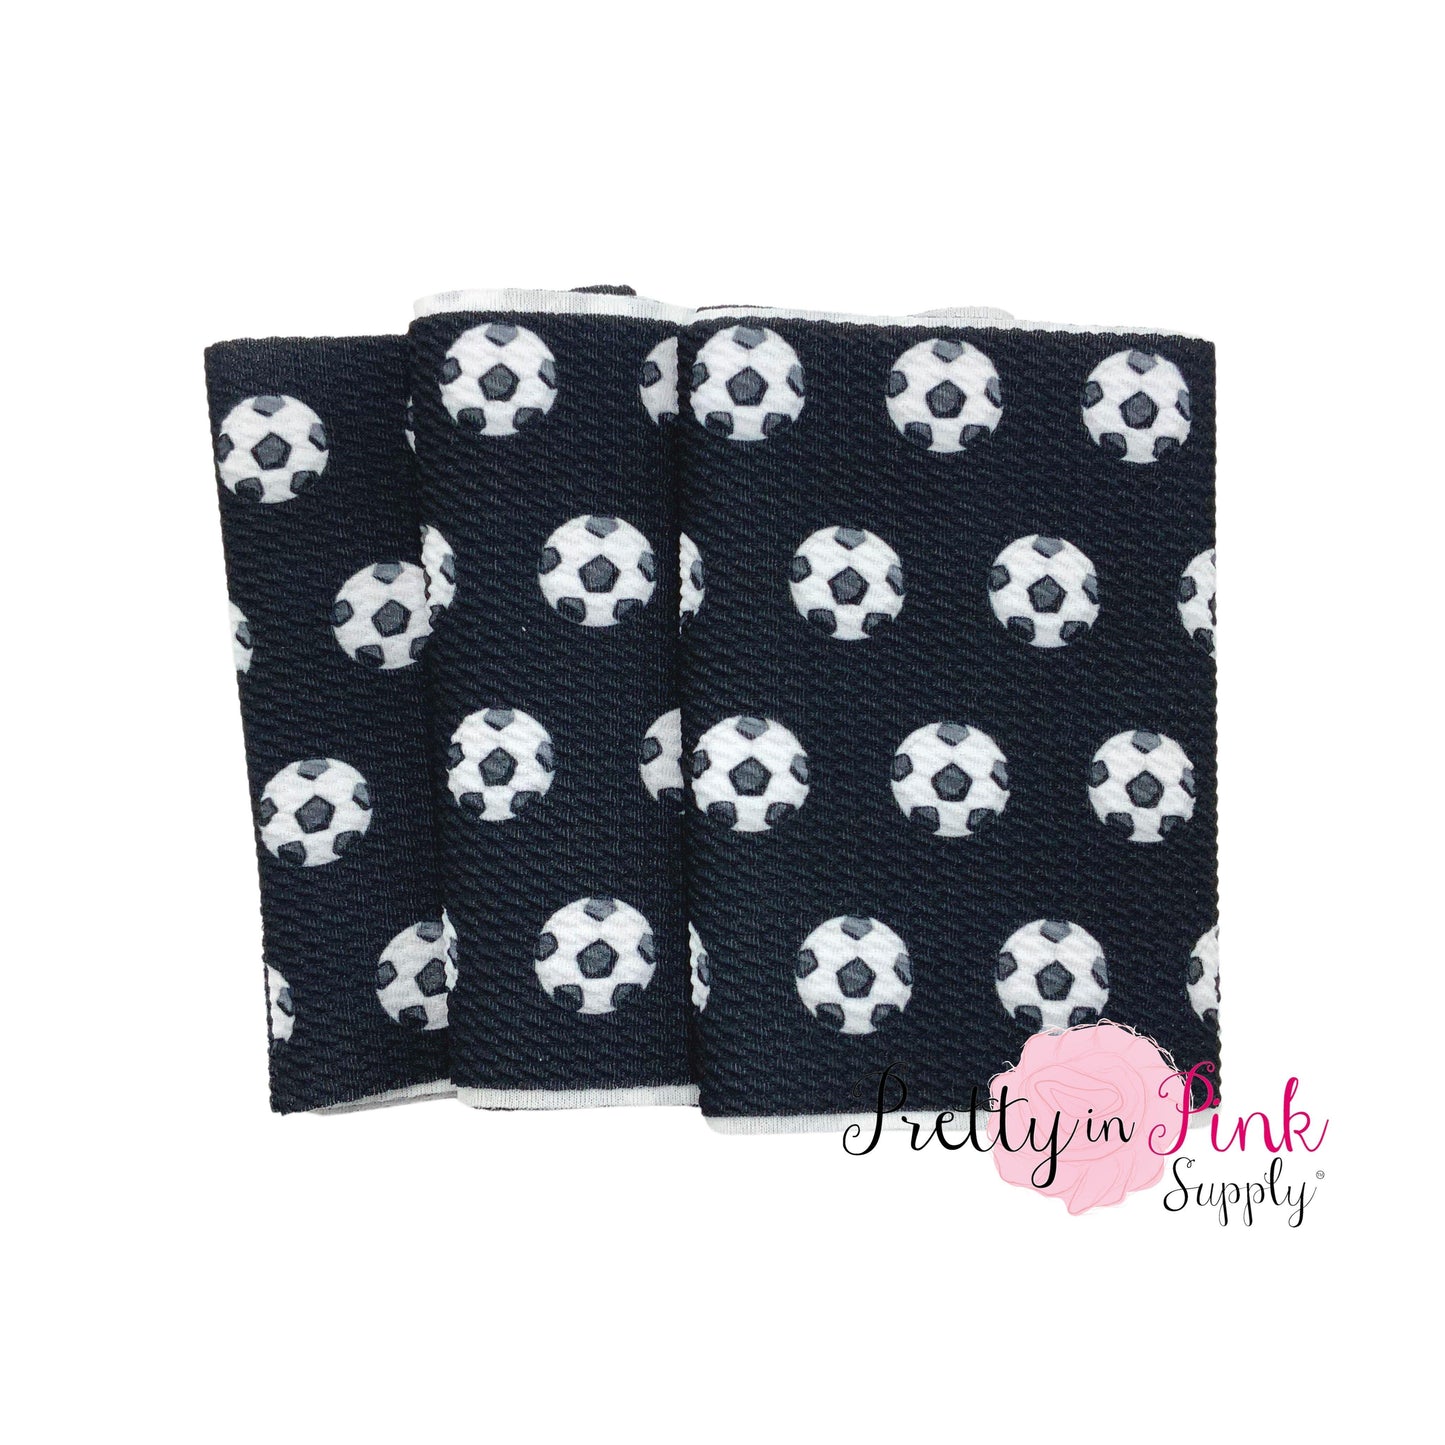 Folded black liverpool fabric strip with soccer balls.